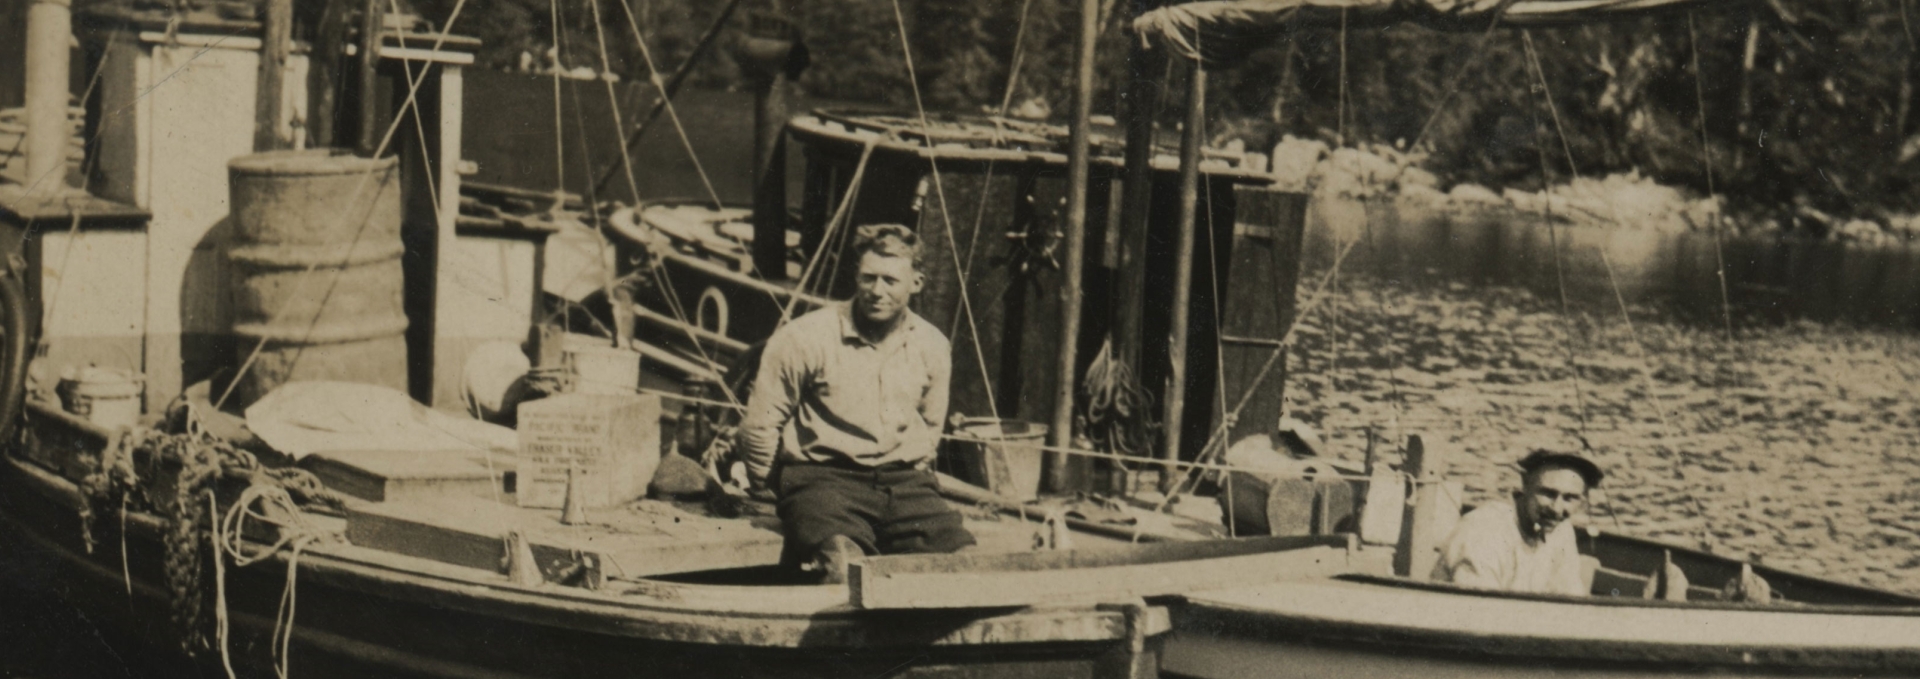 Olafur Alafson and George Gunderson fishing on their gillnetters. Delta Archives, 2021-035-063. Courtesy of the Delta Heritage Society